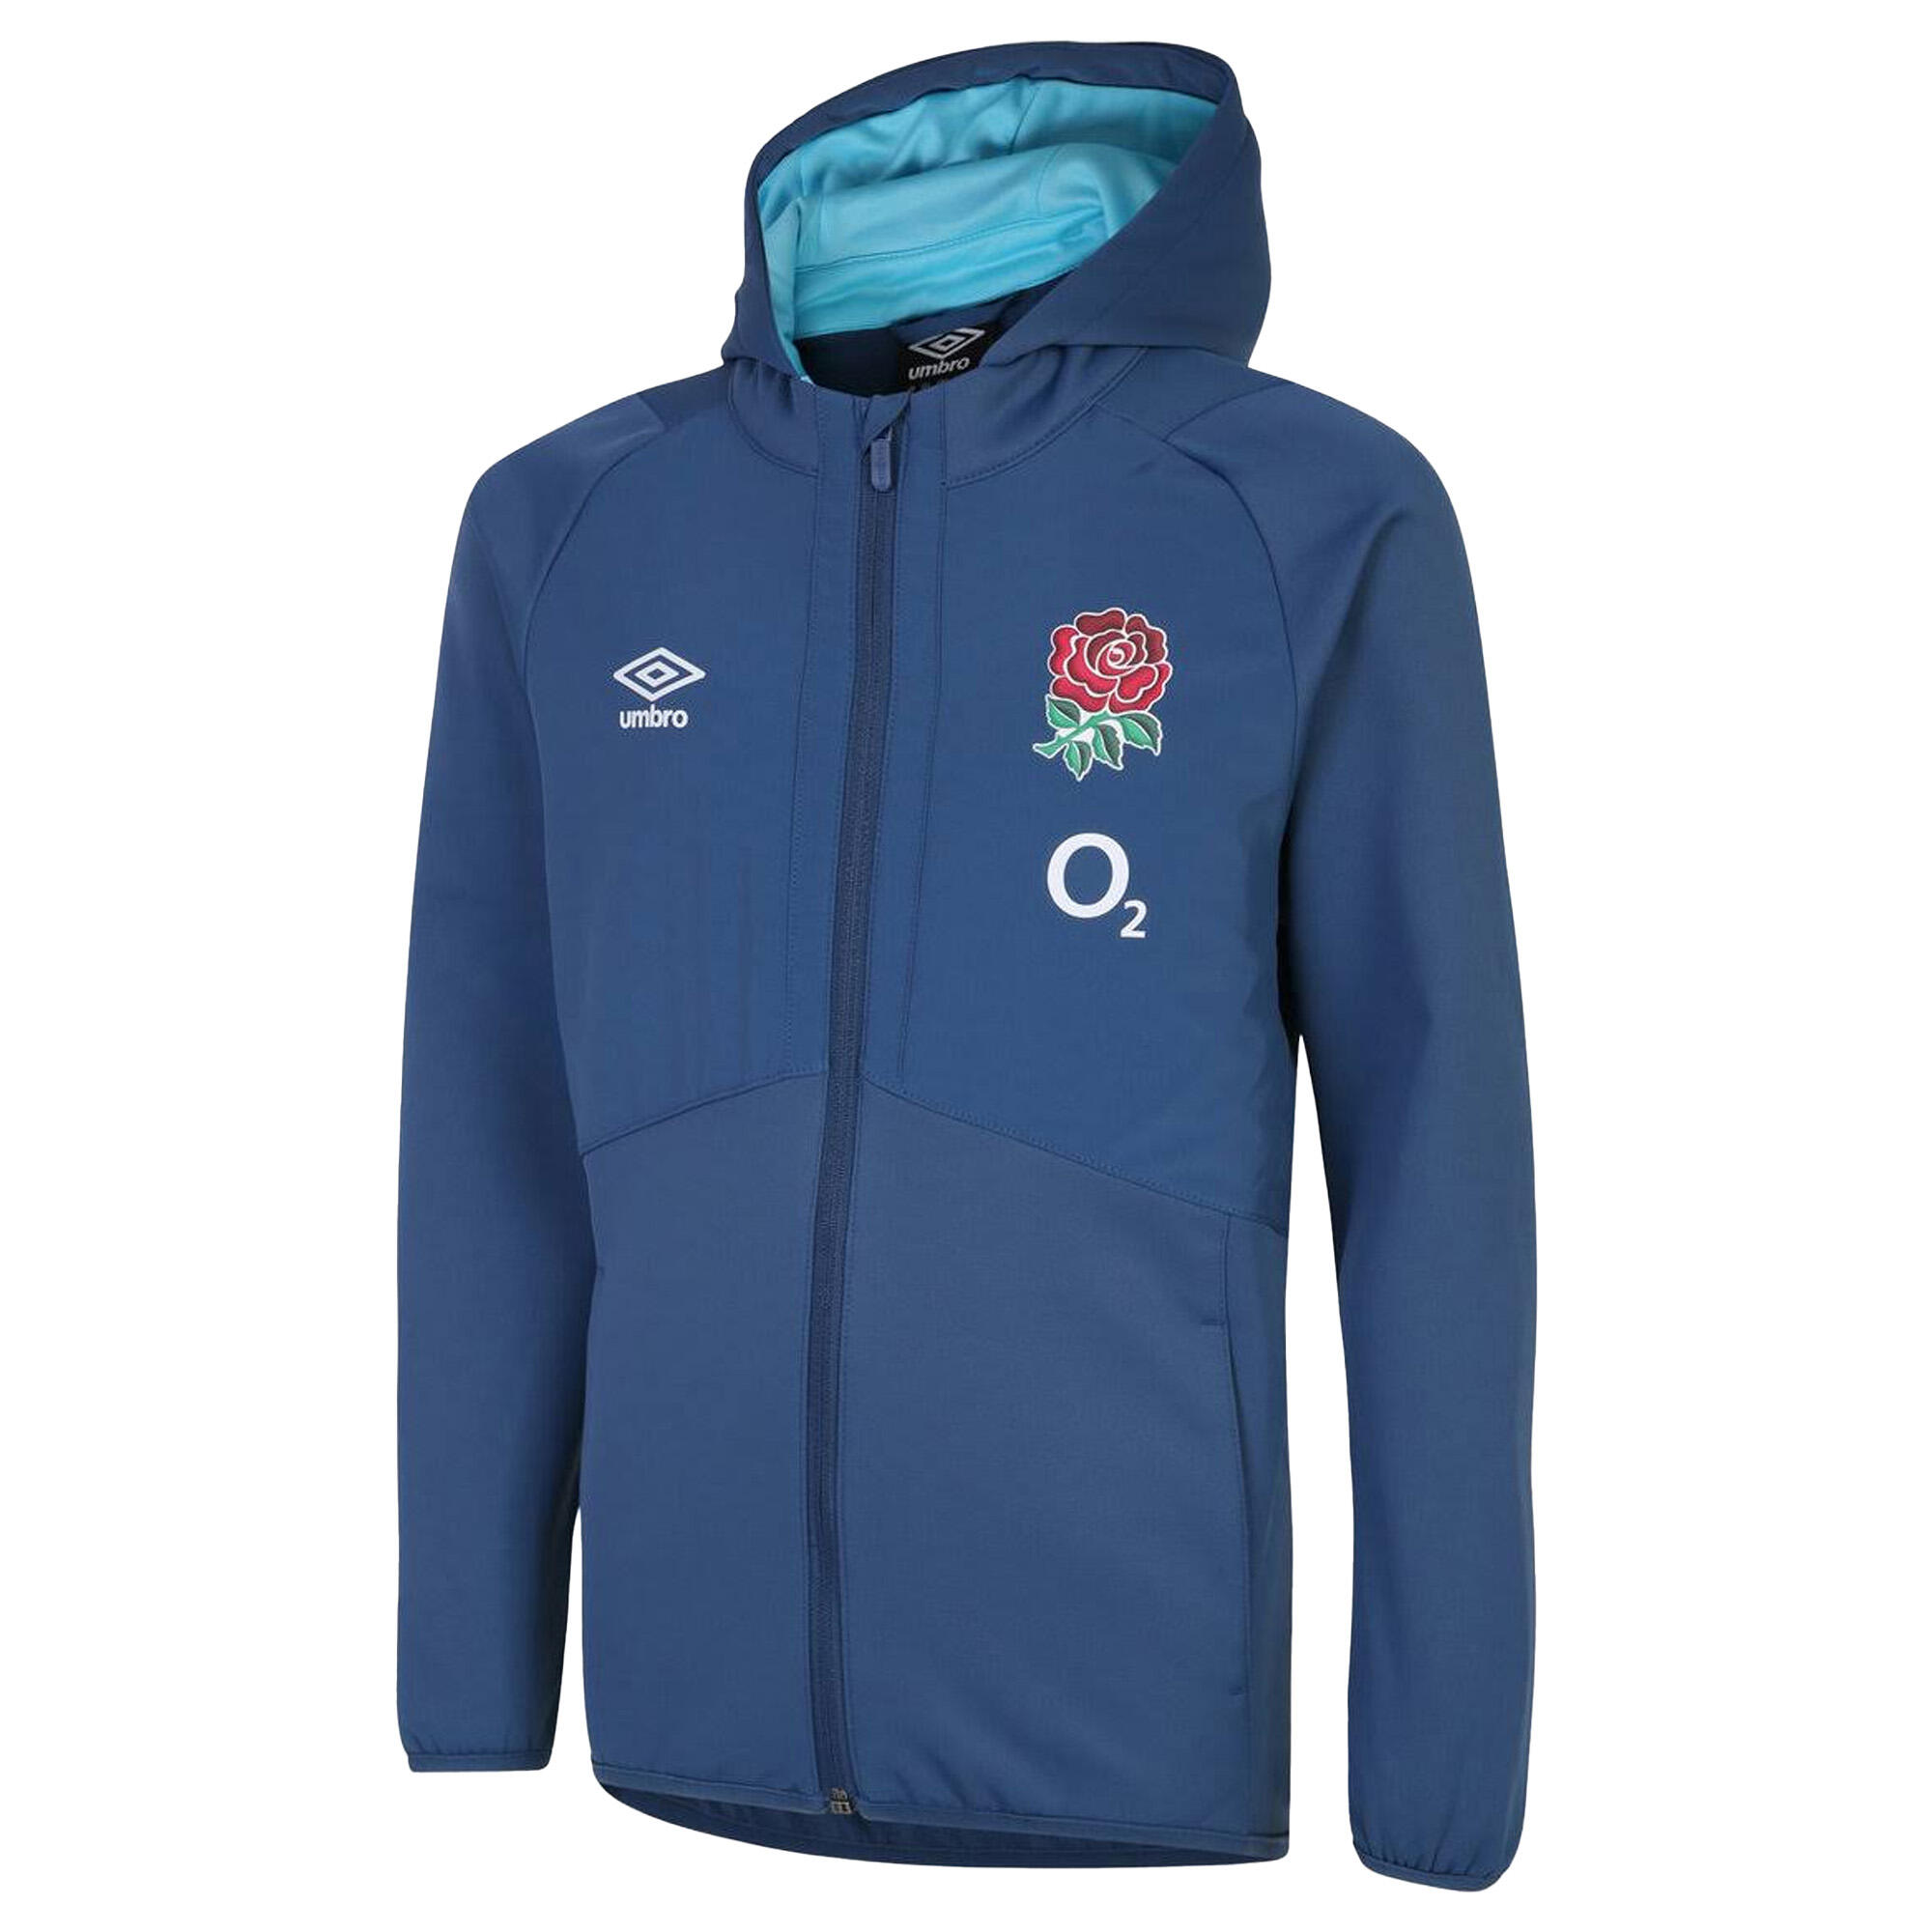 UMBRO England Rugby Childrens/Kids 22/23 Full Zip Hoodie (Ensign Blue/Bachelor Button)